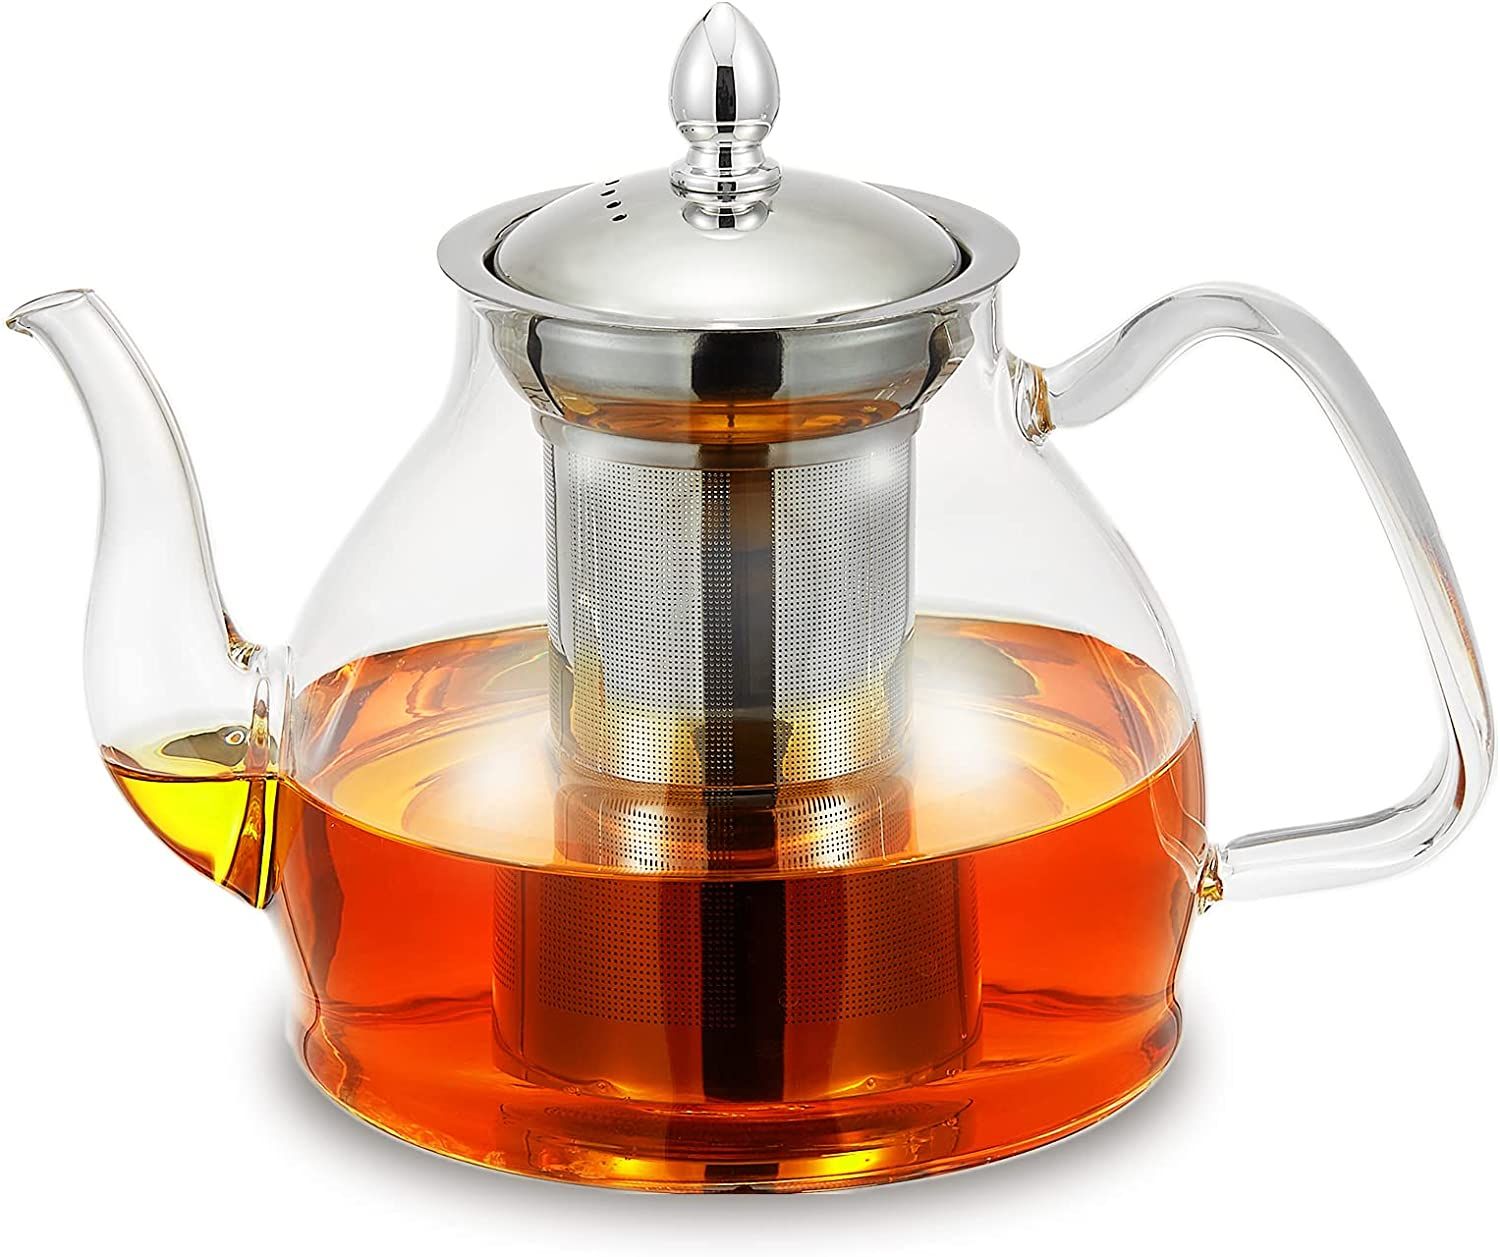 glass teapot with infuser insert with amber colored tea in it